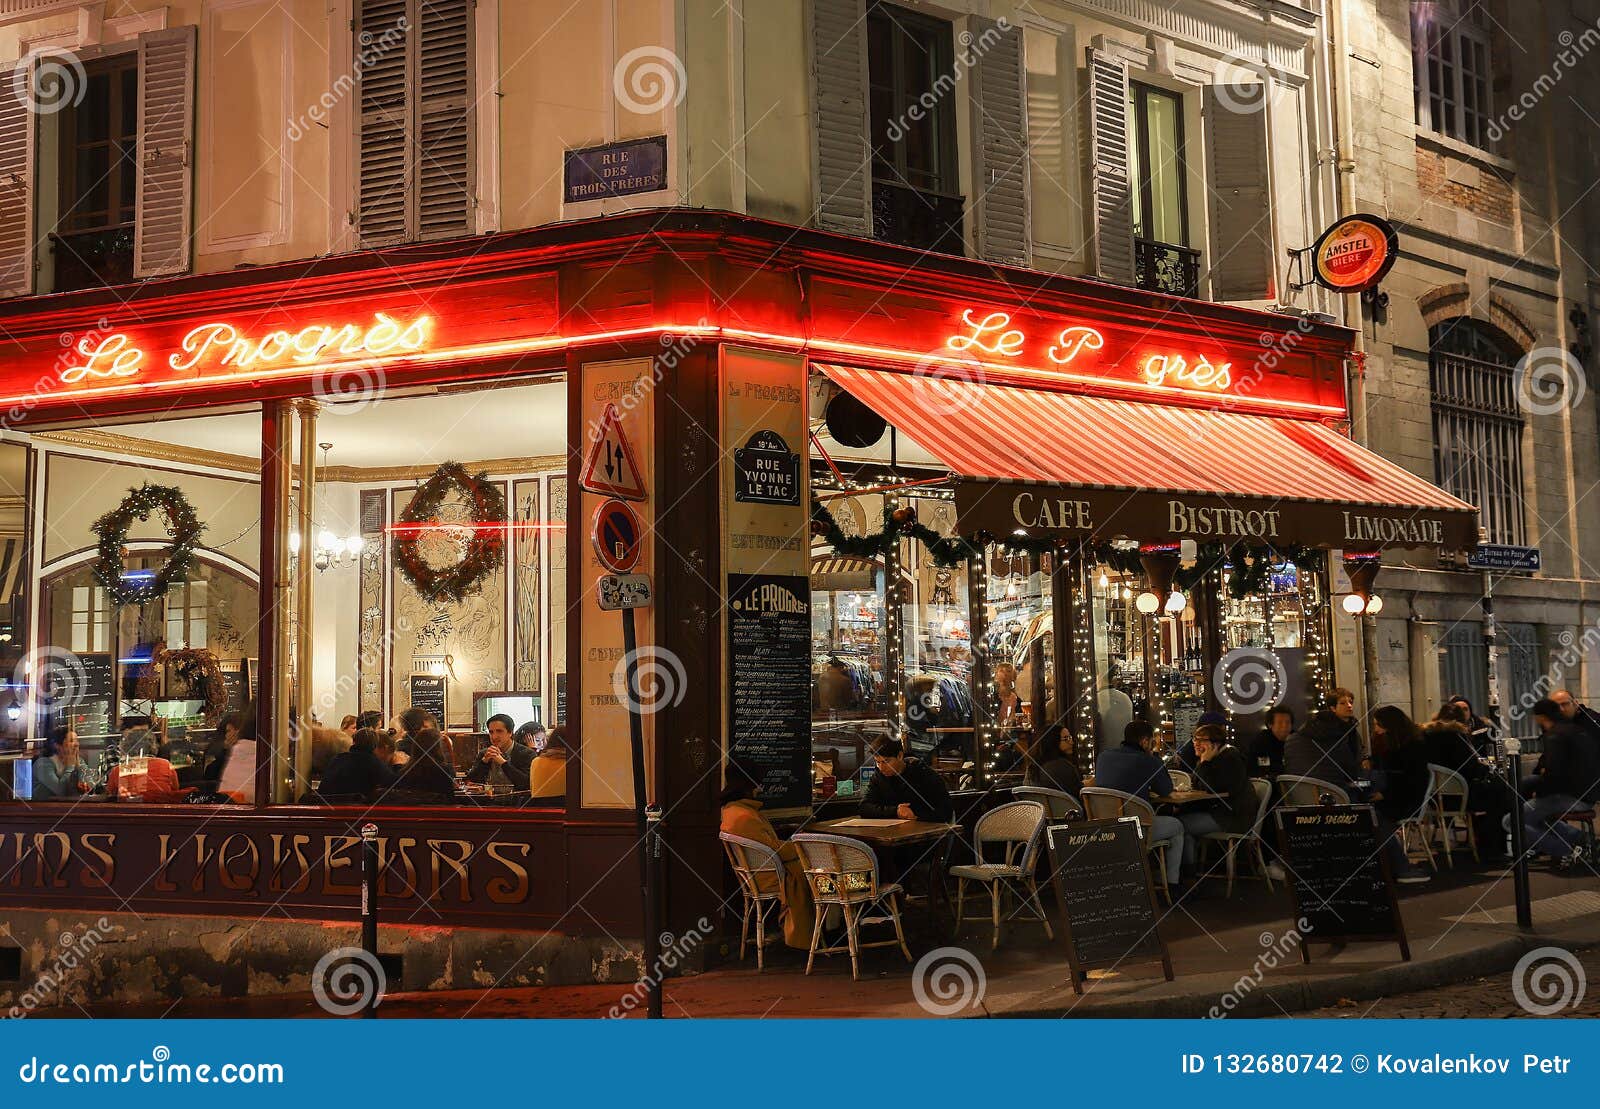 The French Traditional Bistrot Le Progres at Night, Paris, France ...